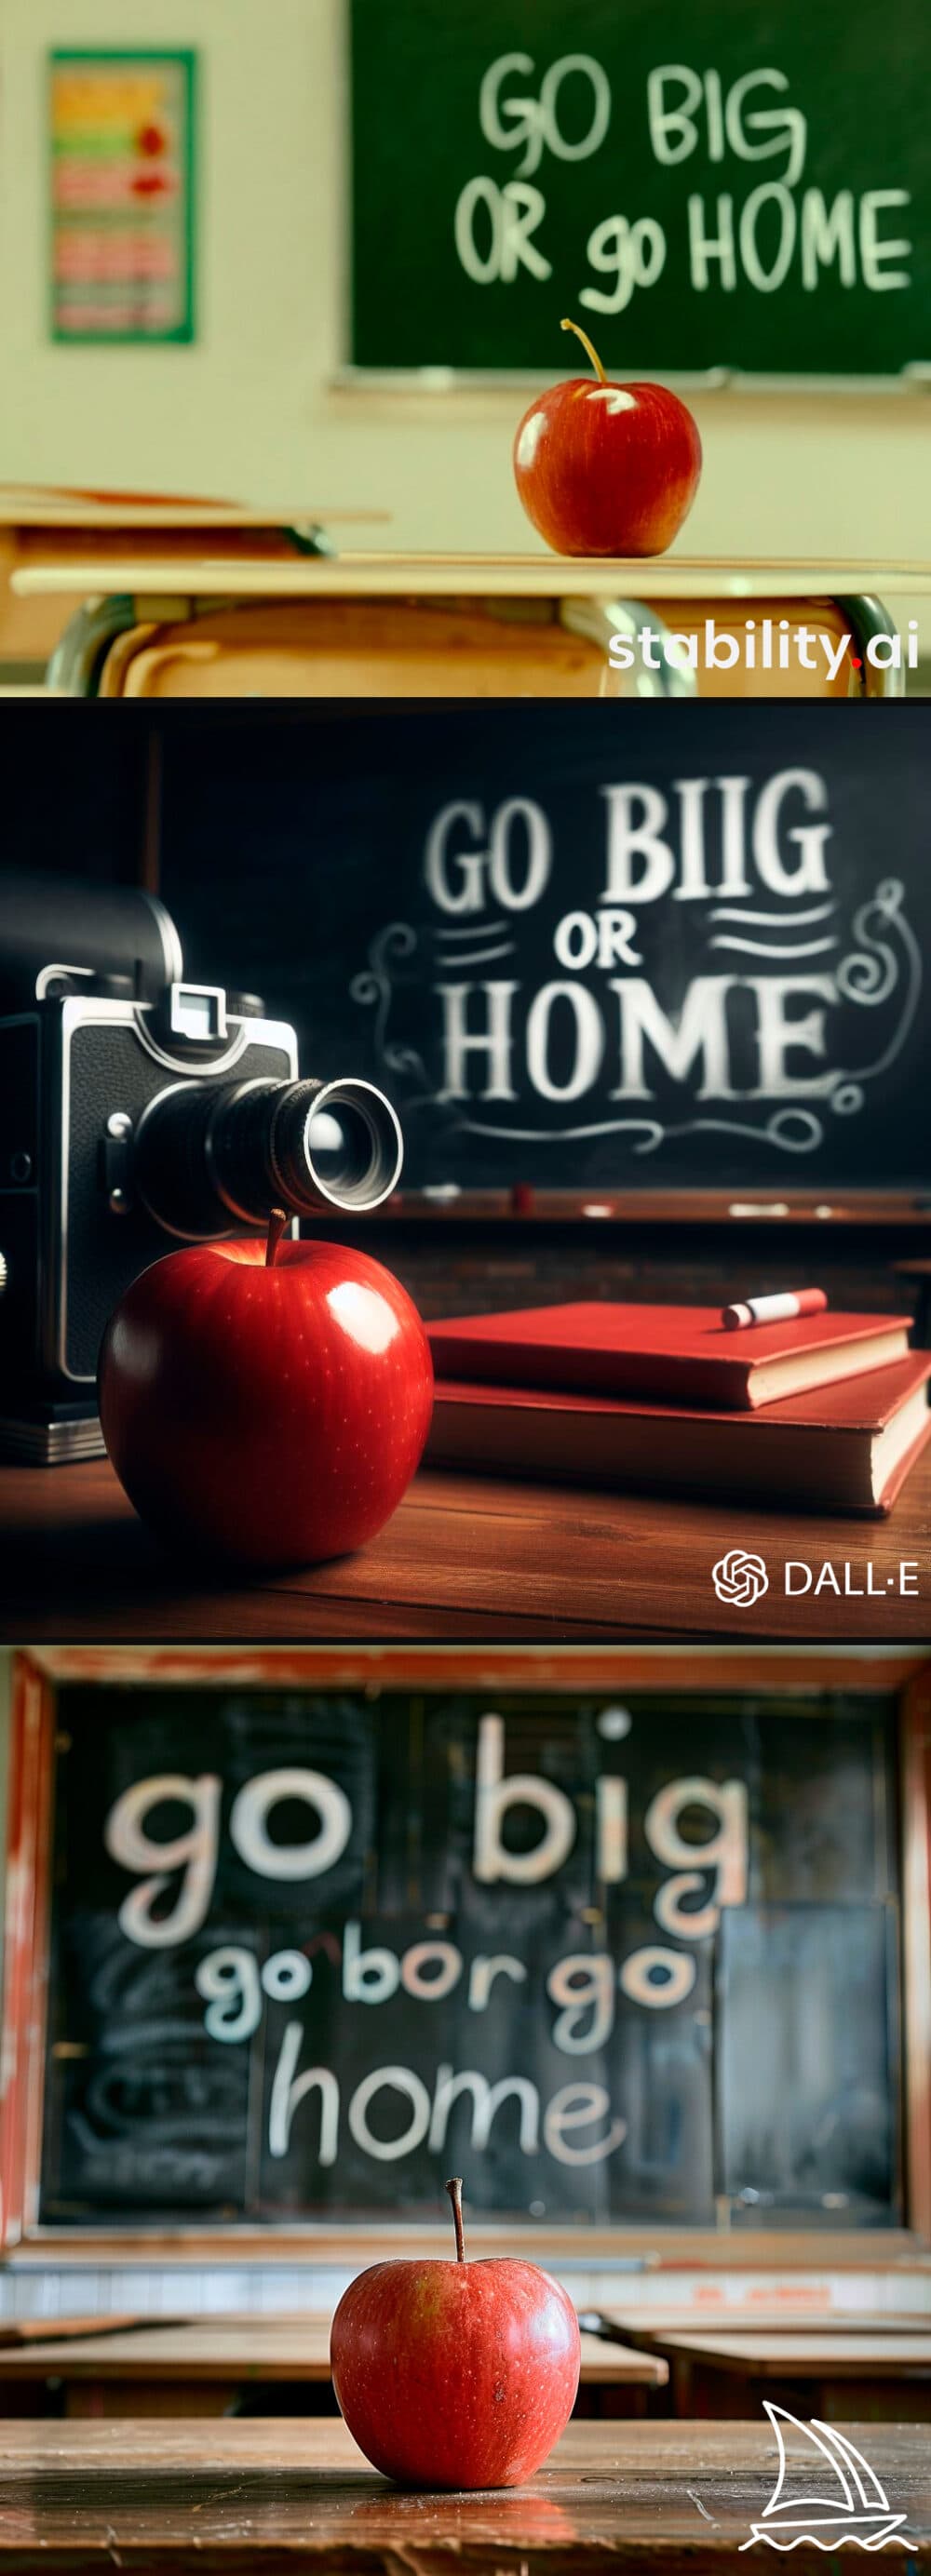 Prompt: cinematic photo of a red apple on a table in a classroom, on the blackboard are the words "go big or go home" written in chalk